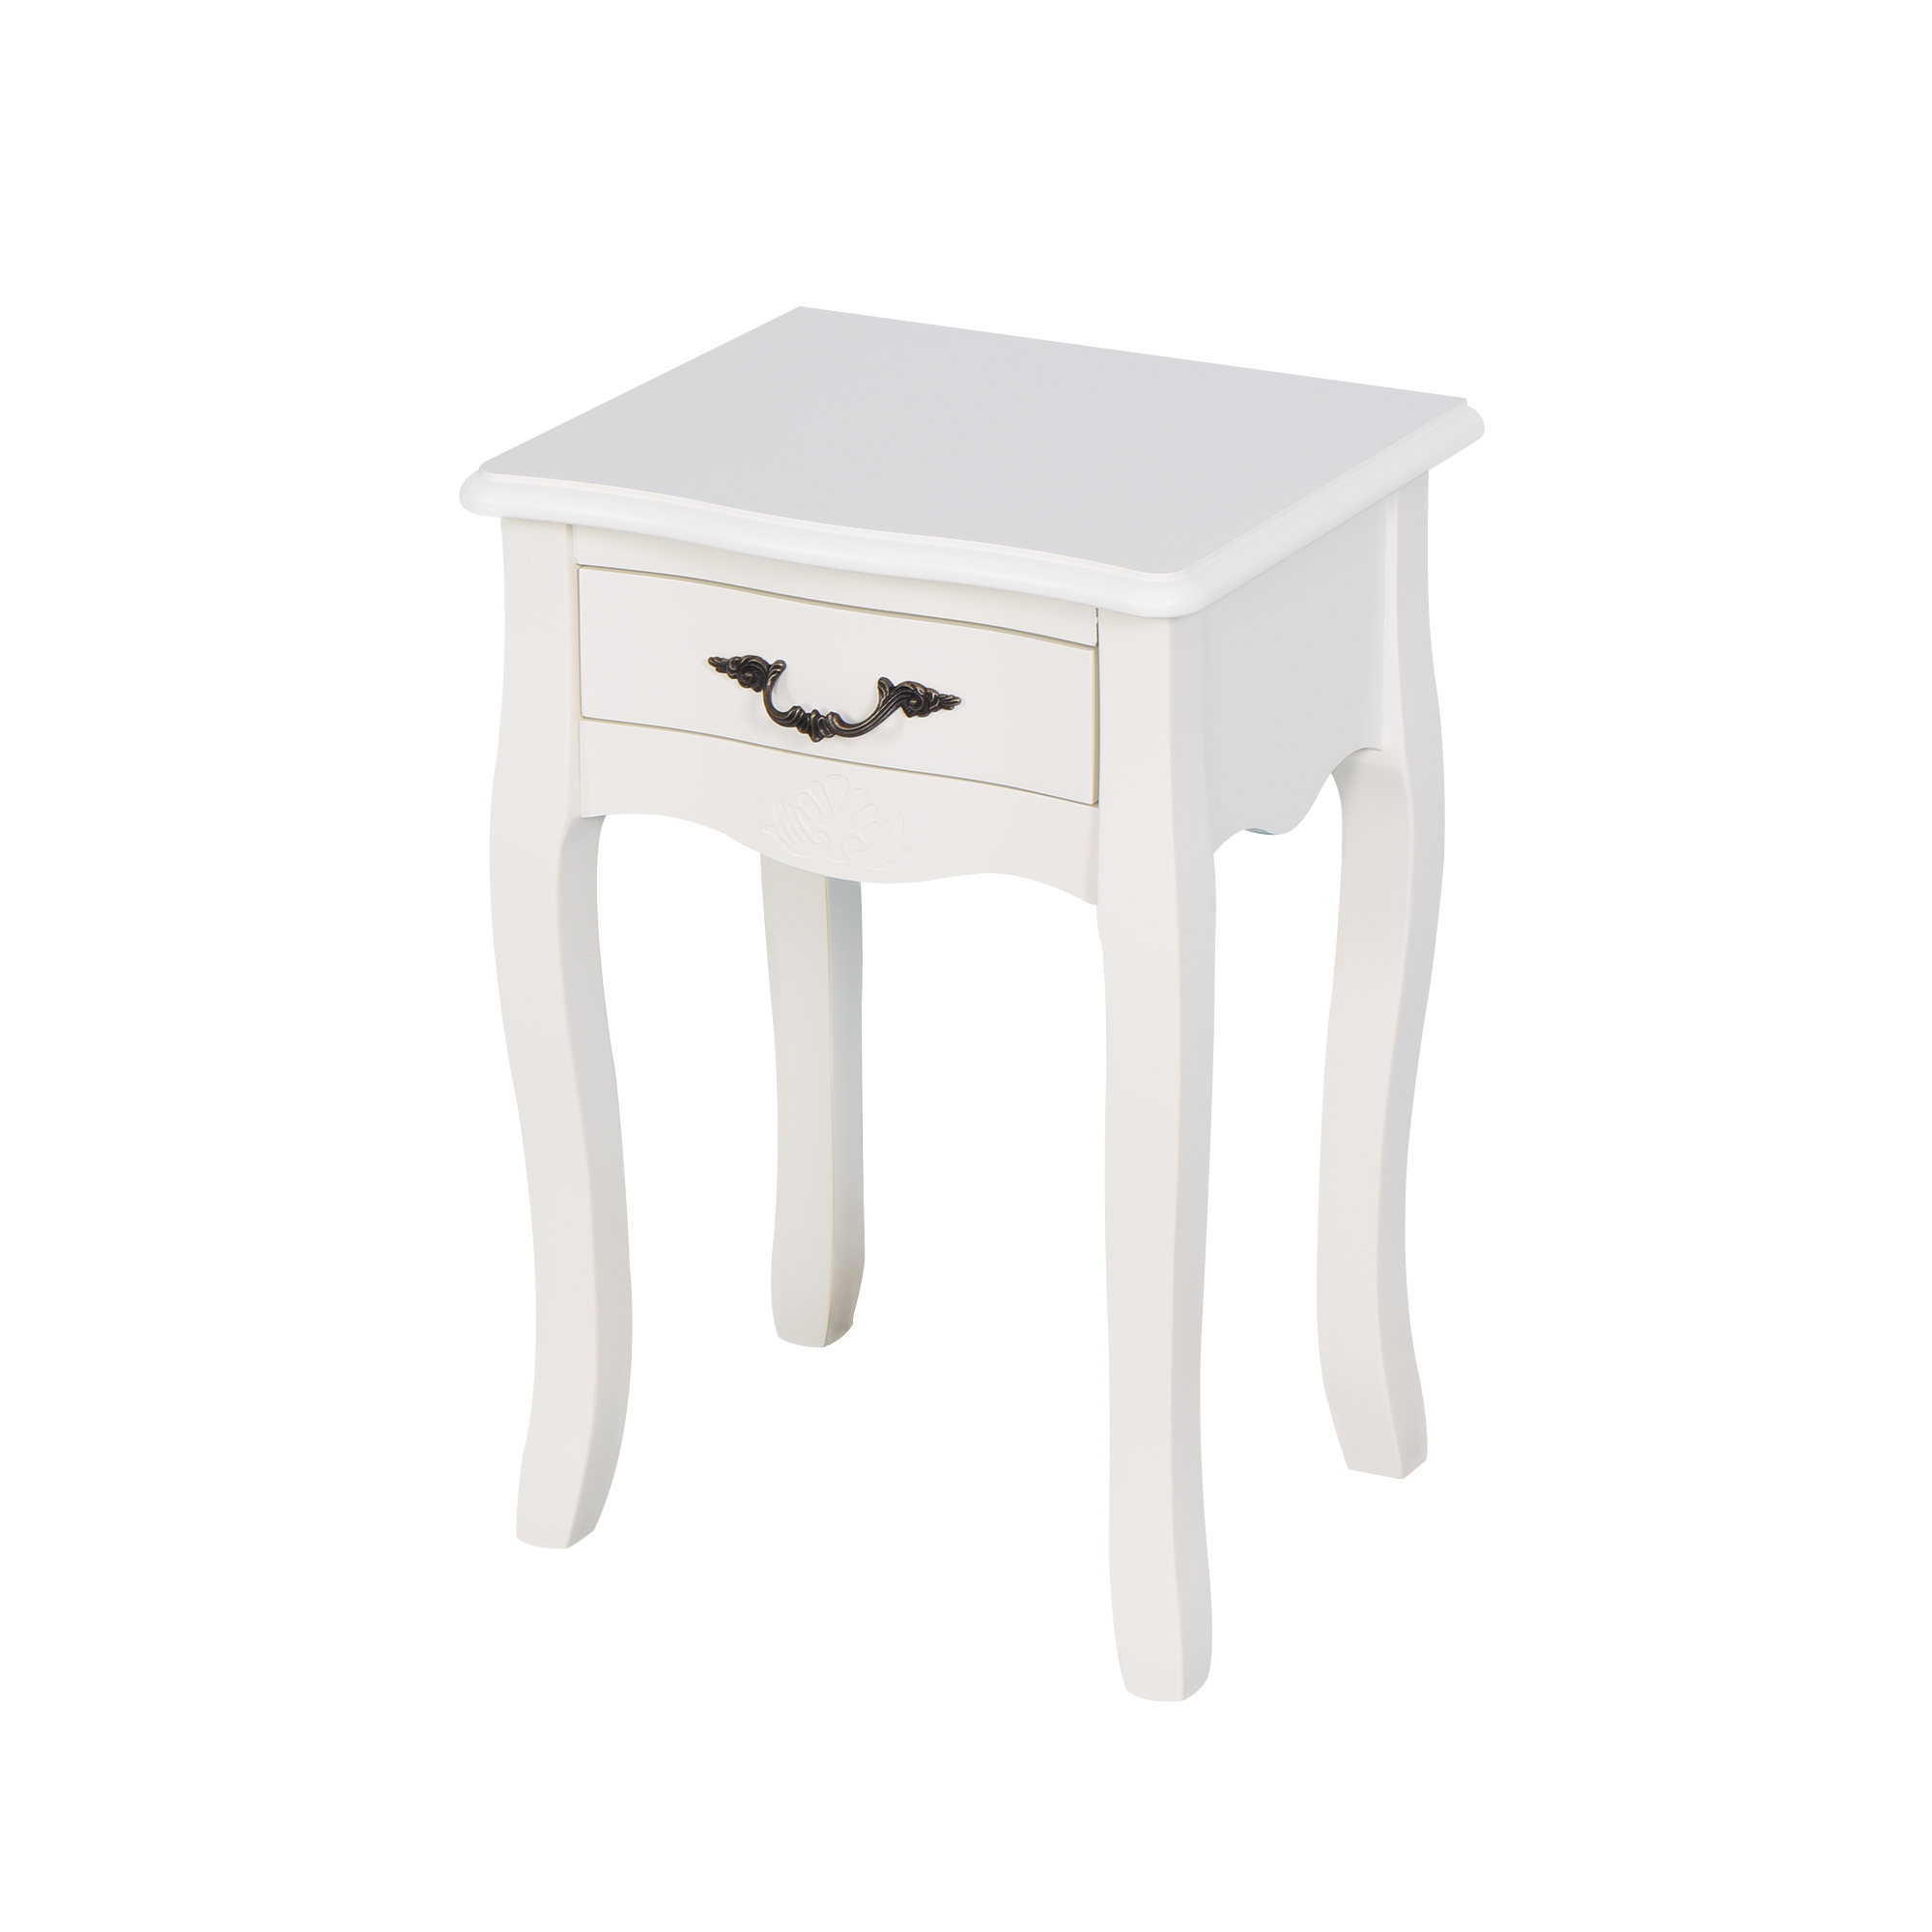 White Living Room Floor-standing Storage Table with a Drawer, 4 Curved Legs-Boyel Living